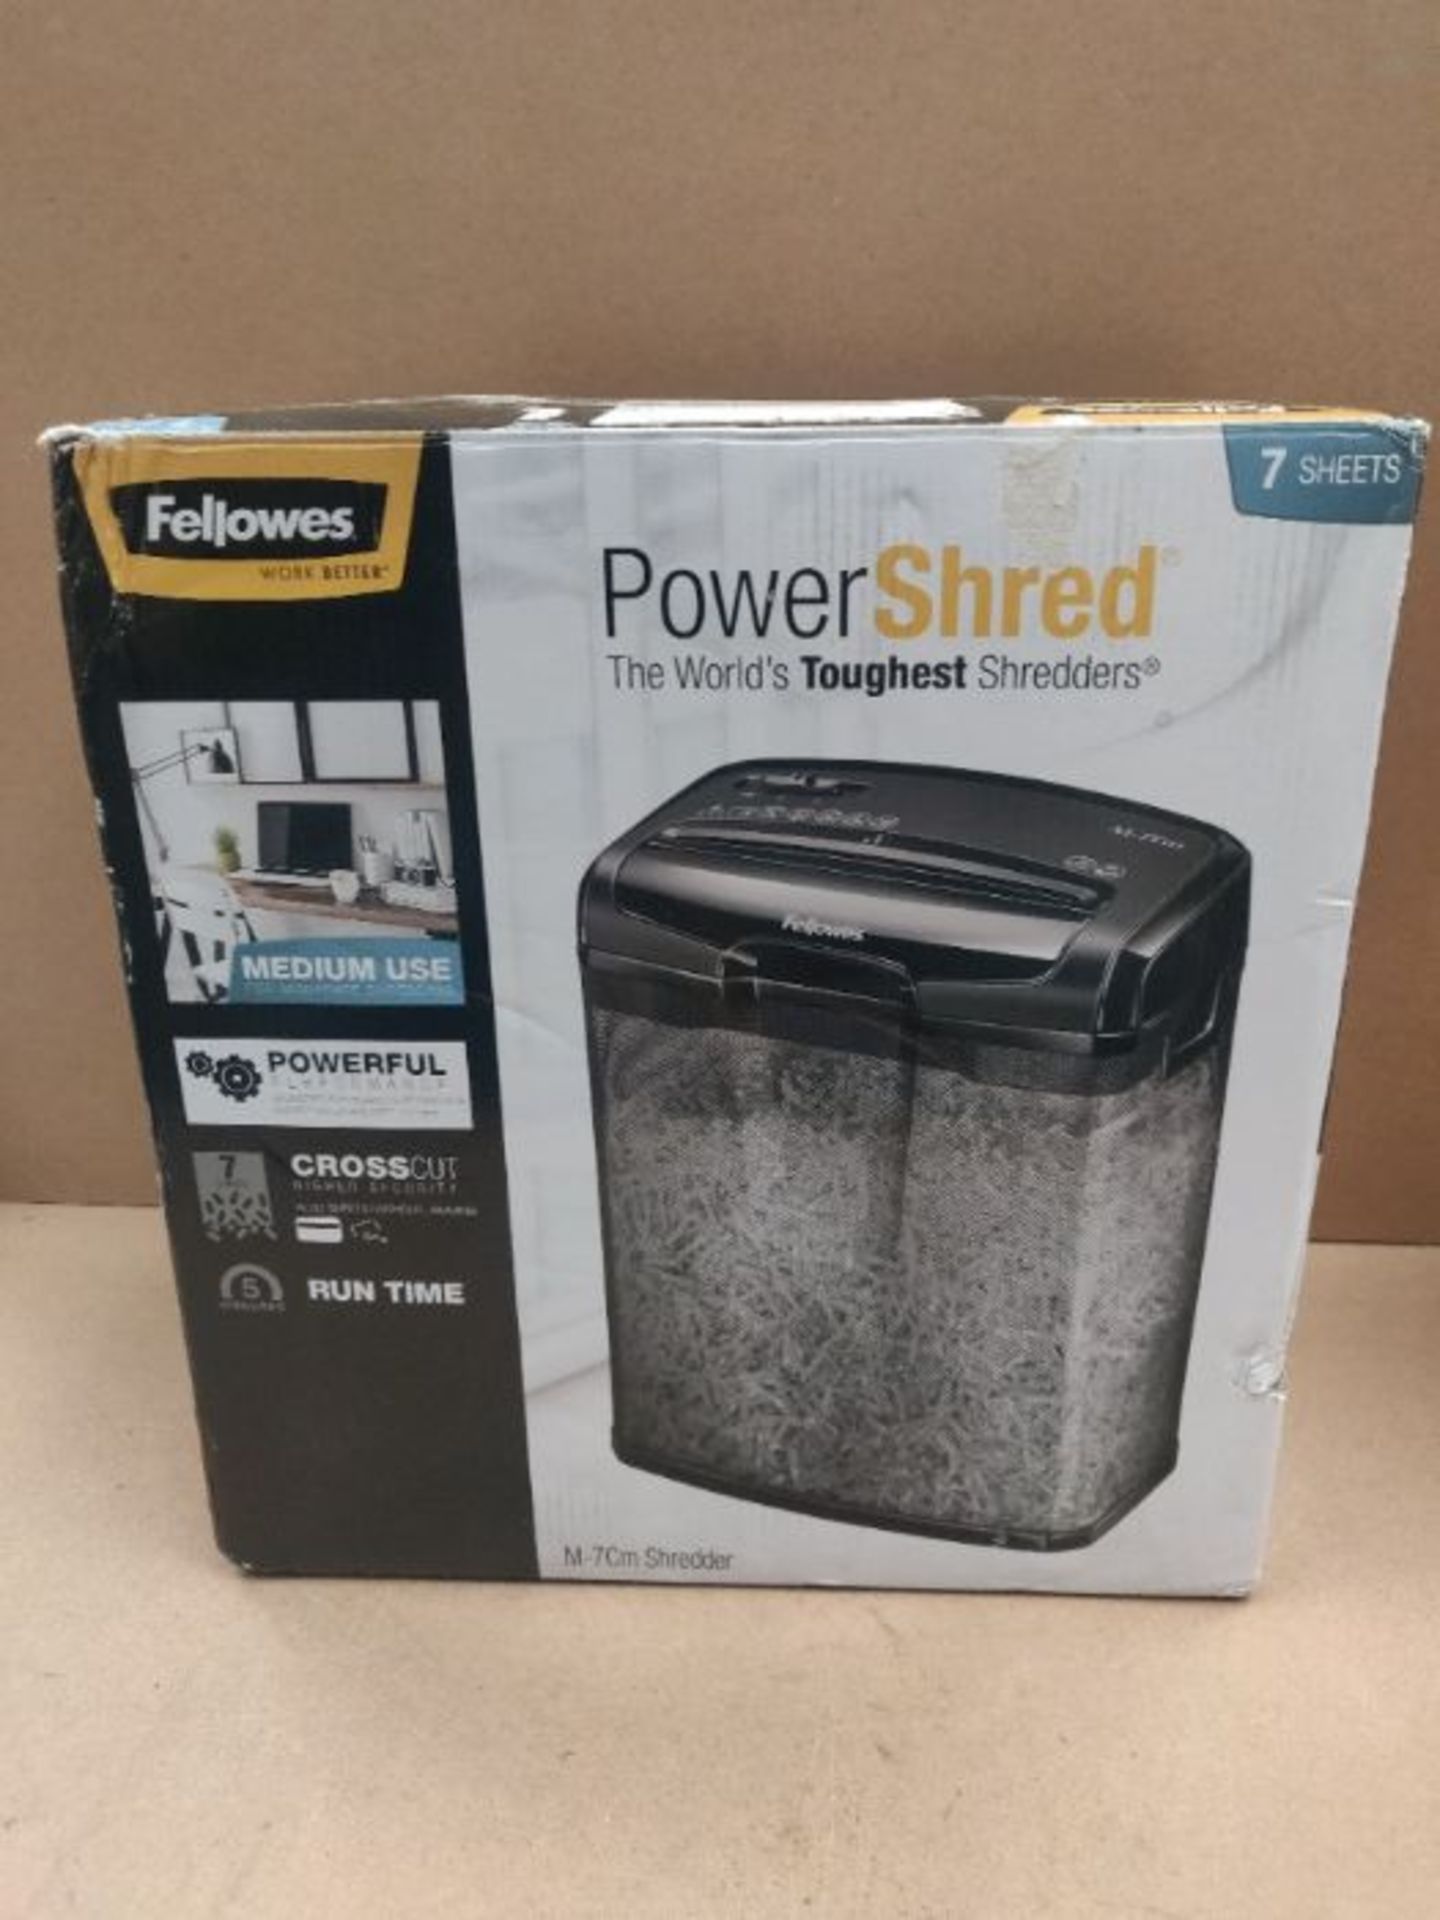 Fellowes Powershred M-7CM Personal 7 Sheet Cross Cut Paper Shredder for Home Use - Image 2 of 3